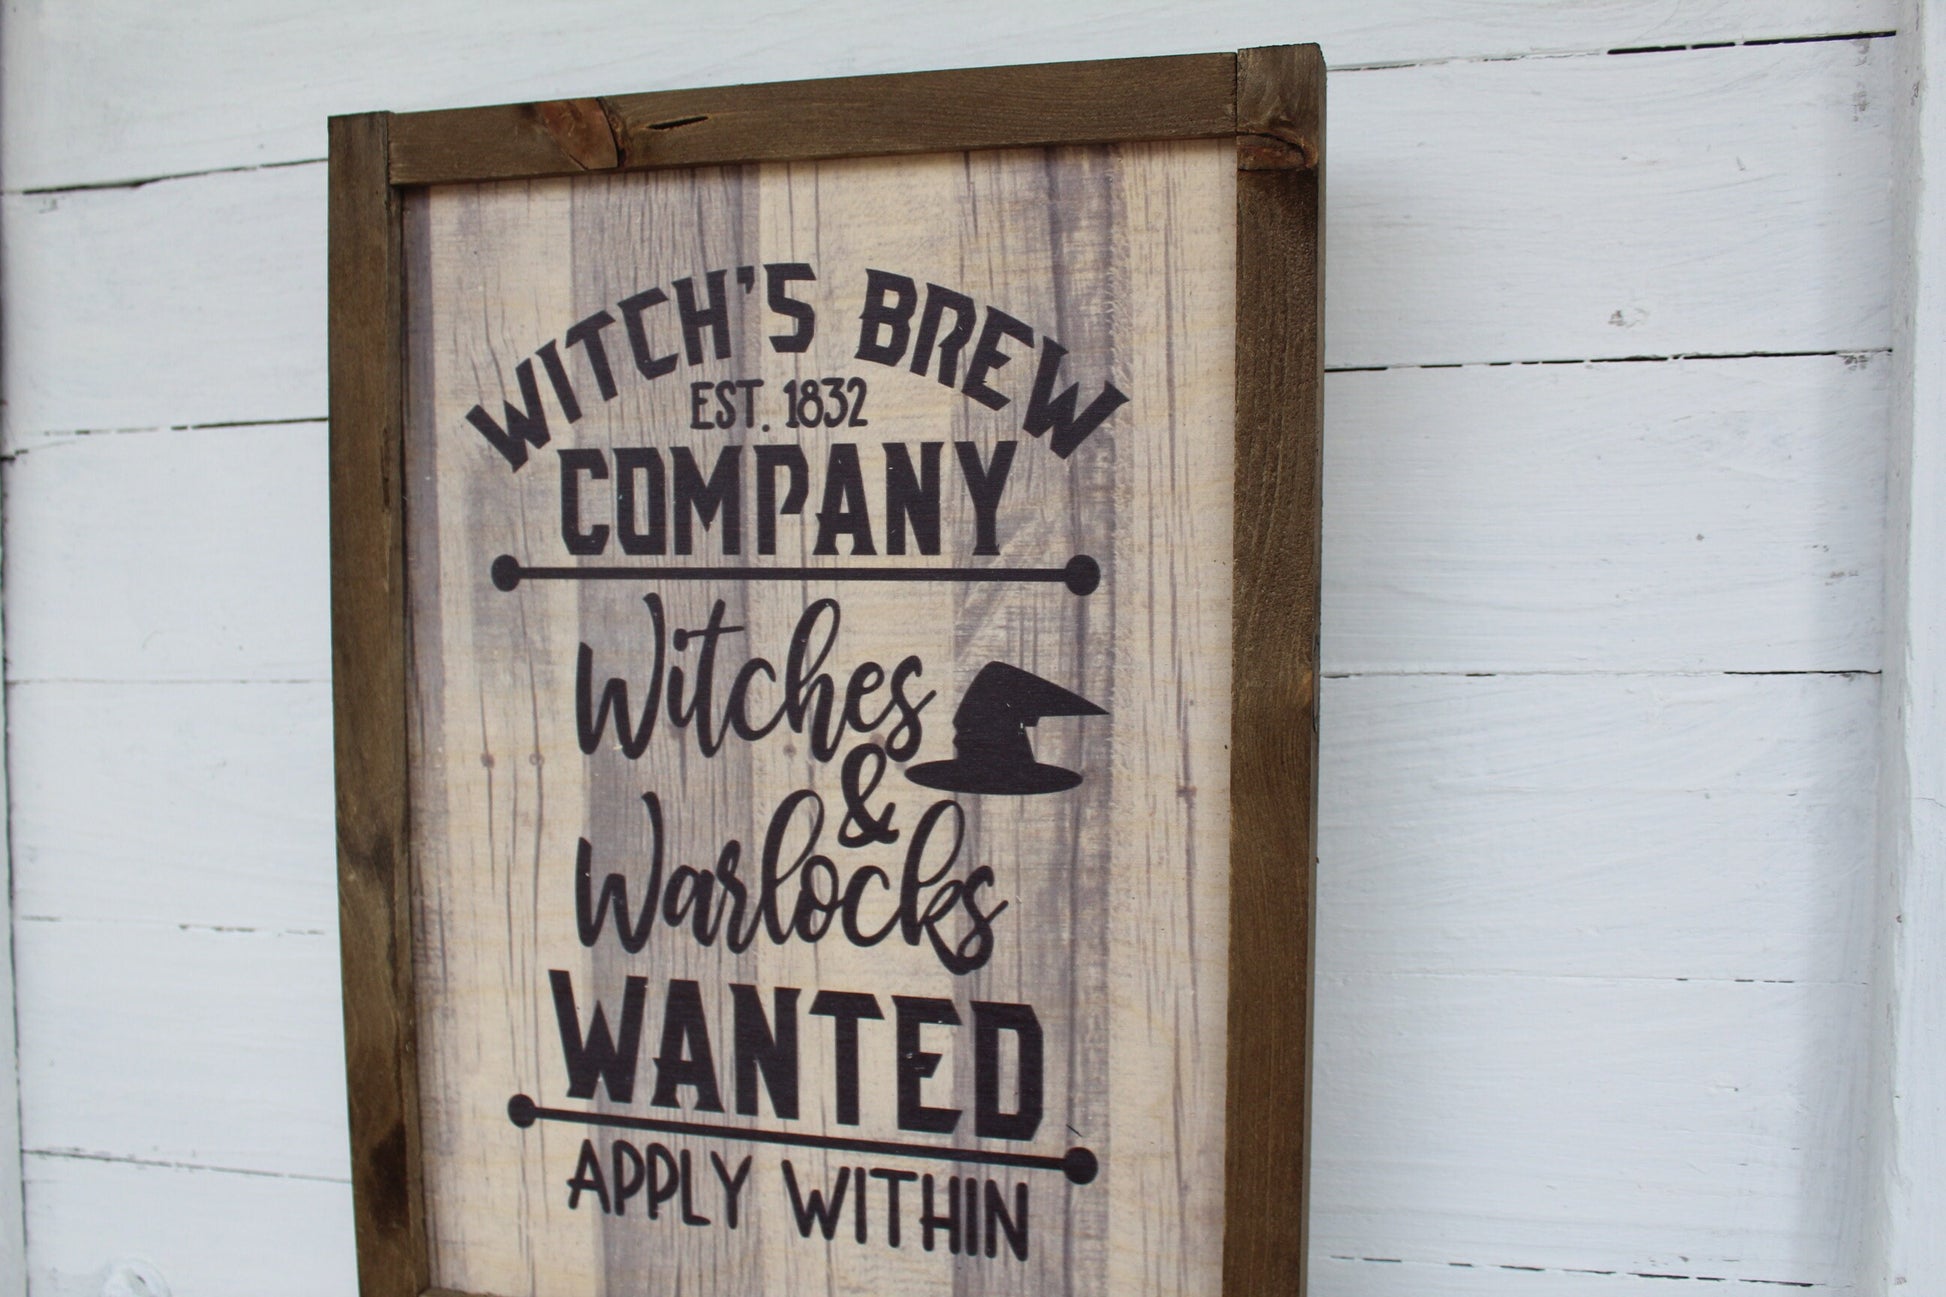 Witches Brew Company Witches and Warlocks Wanted Halloween Rustic Wood Sign Framed Print Decor Farmhouse Primitive Wall Décor Apply Within